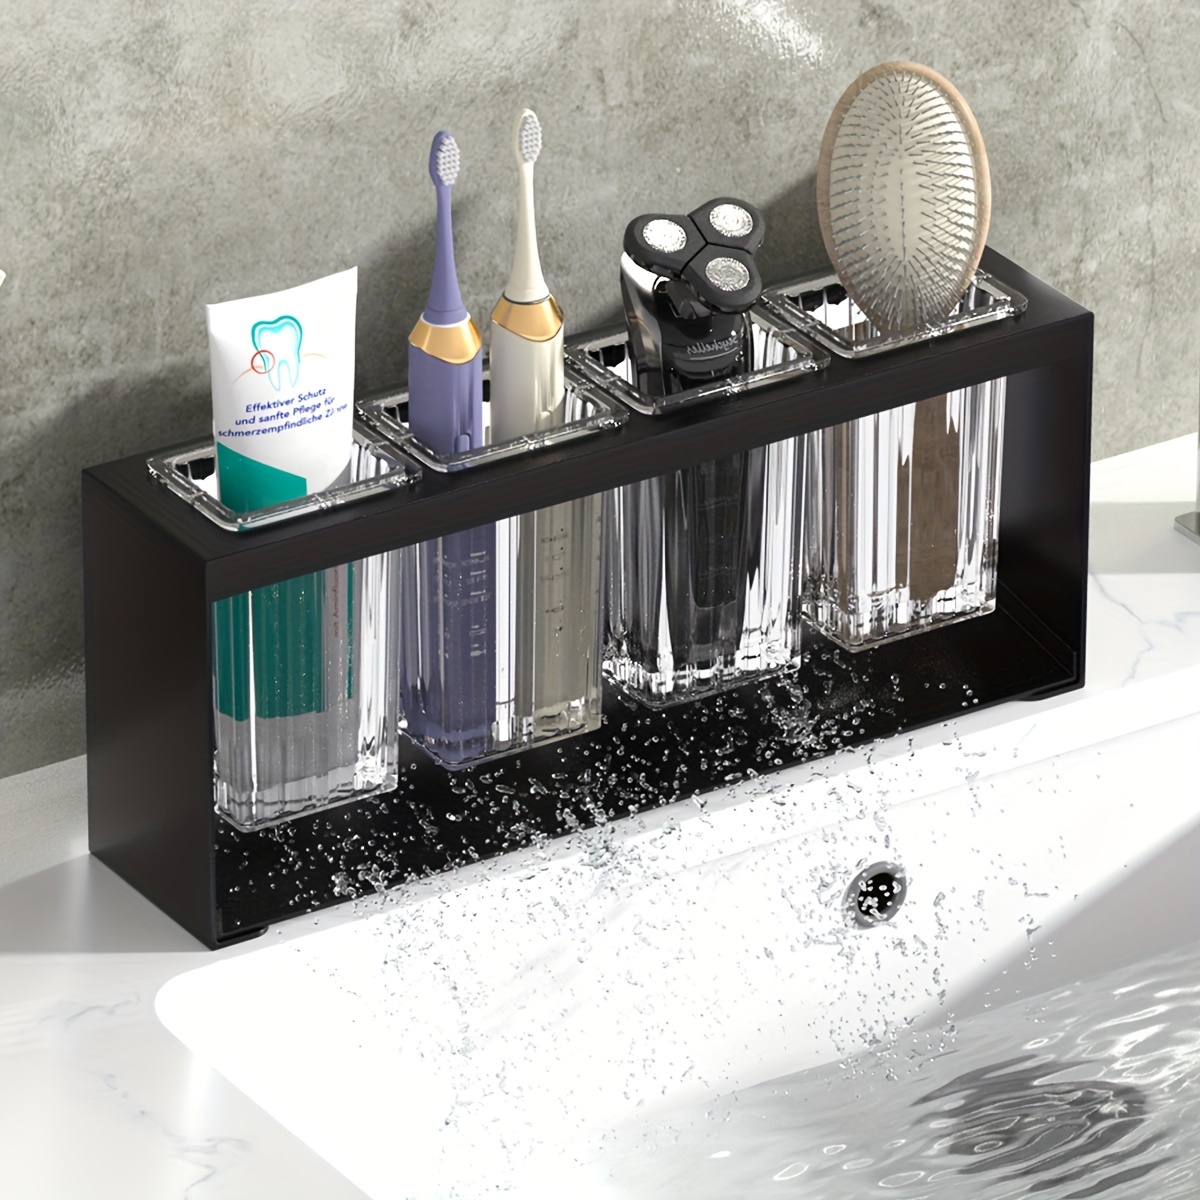 

Multi-functional Bathroom Organizer With Built-in Drainage - Wrought Iron Toothbrush & Toothpaste Holder, Transparent Filter Cup Included Toothbrush Holders For Bathrooms Bathroom Sink Organizer